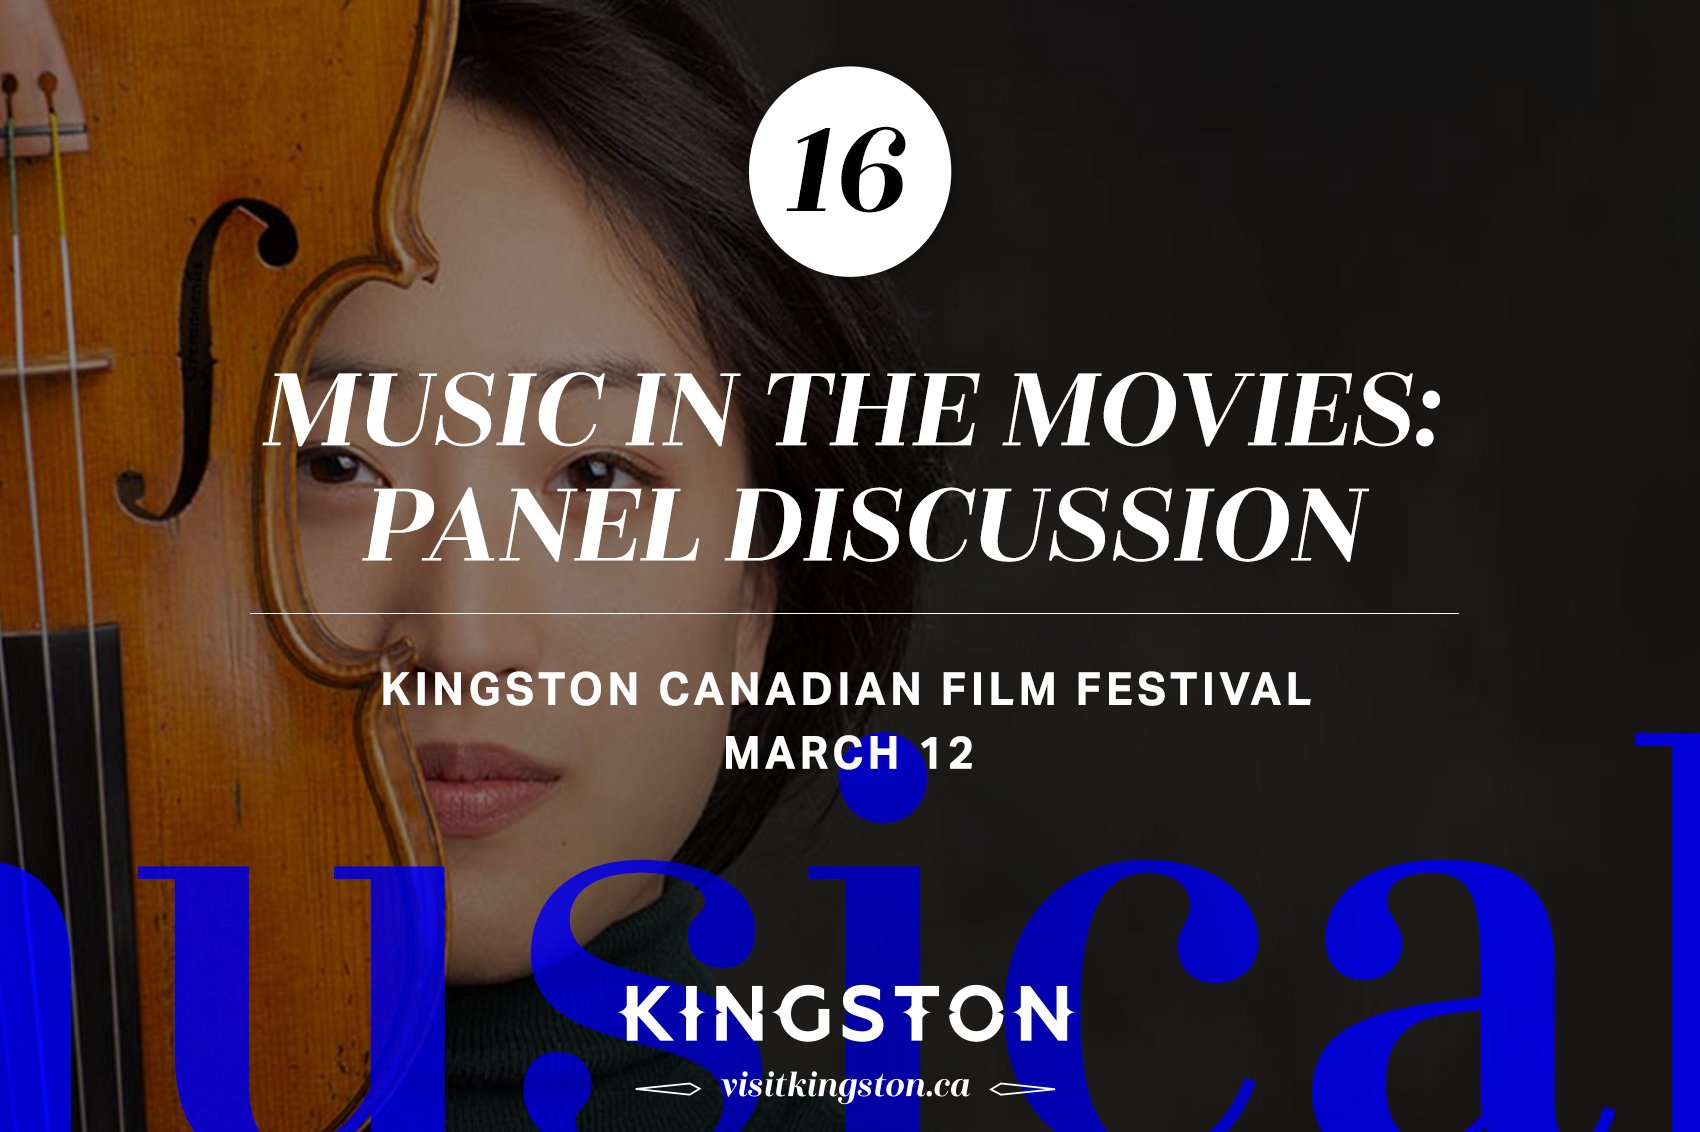 Music in the movies: panel discussion